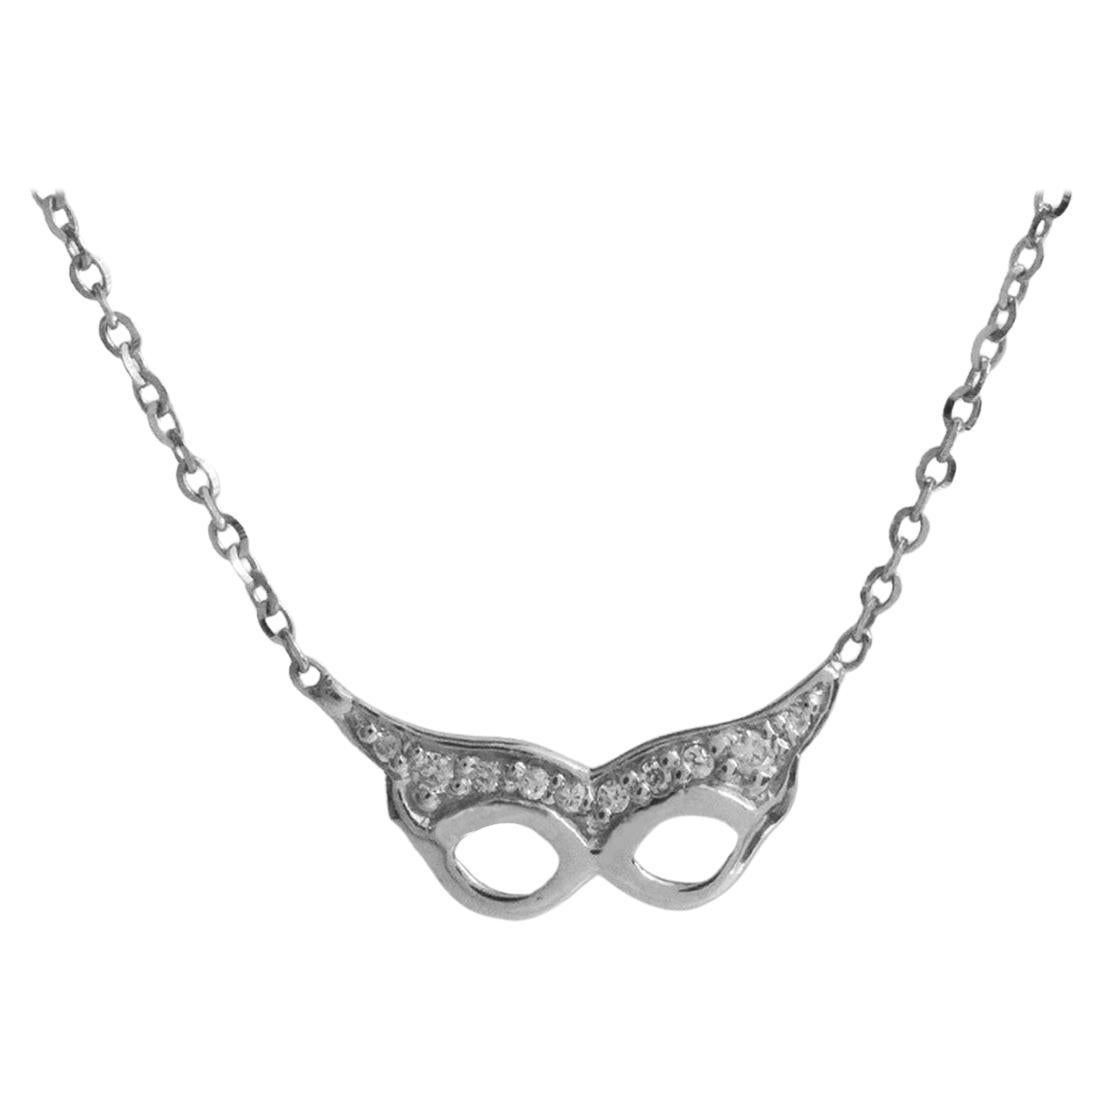 Masquerade Mask Diamond Necklace is made of 14k solid gold available in three colors, White Gold / Rose Gold / Yellow Gold.

Natural genuine round cut diamond, each diamond is hand selected by me to ensure quality and set by a master setter in our